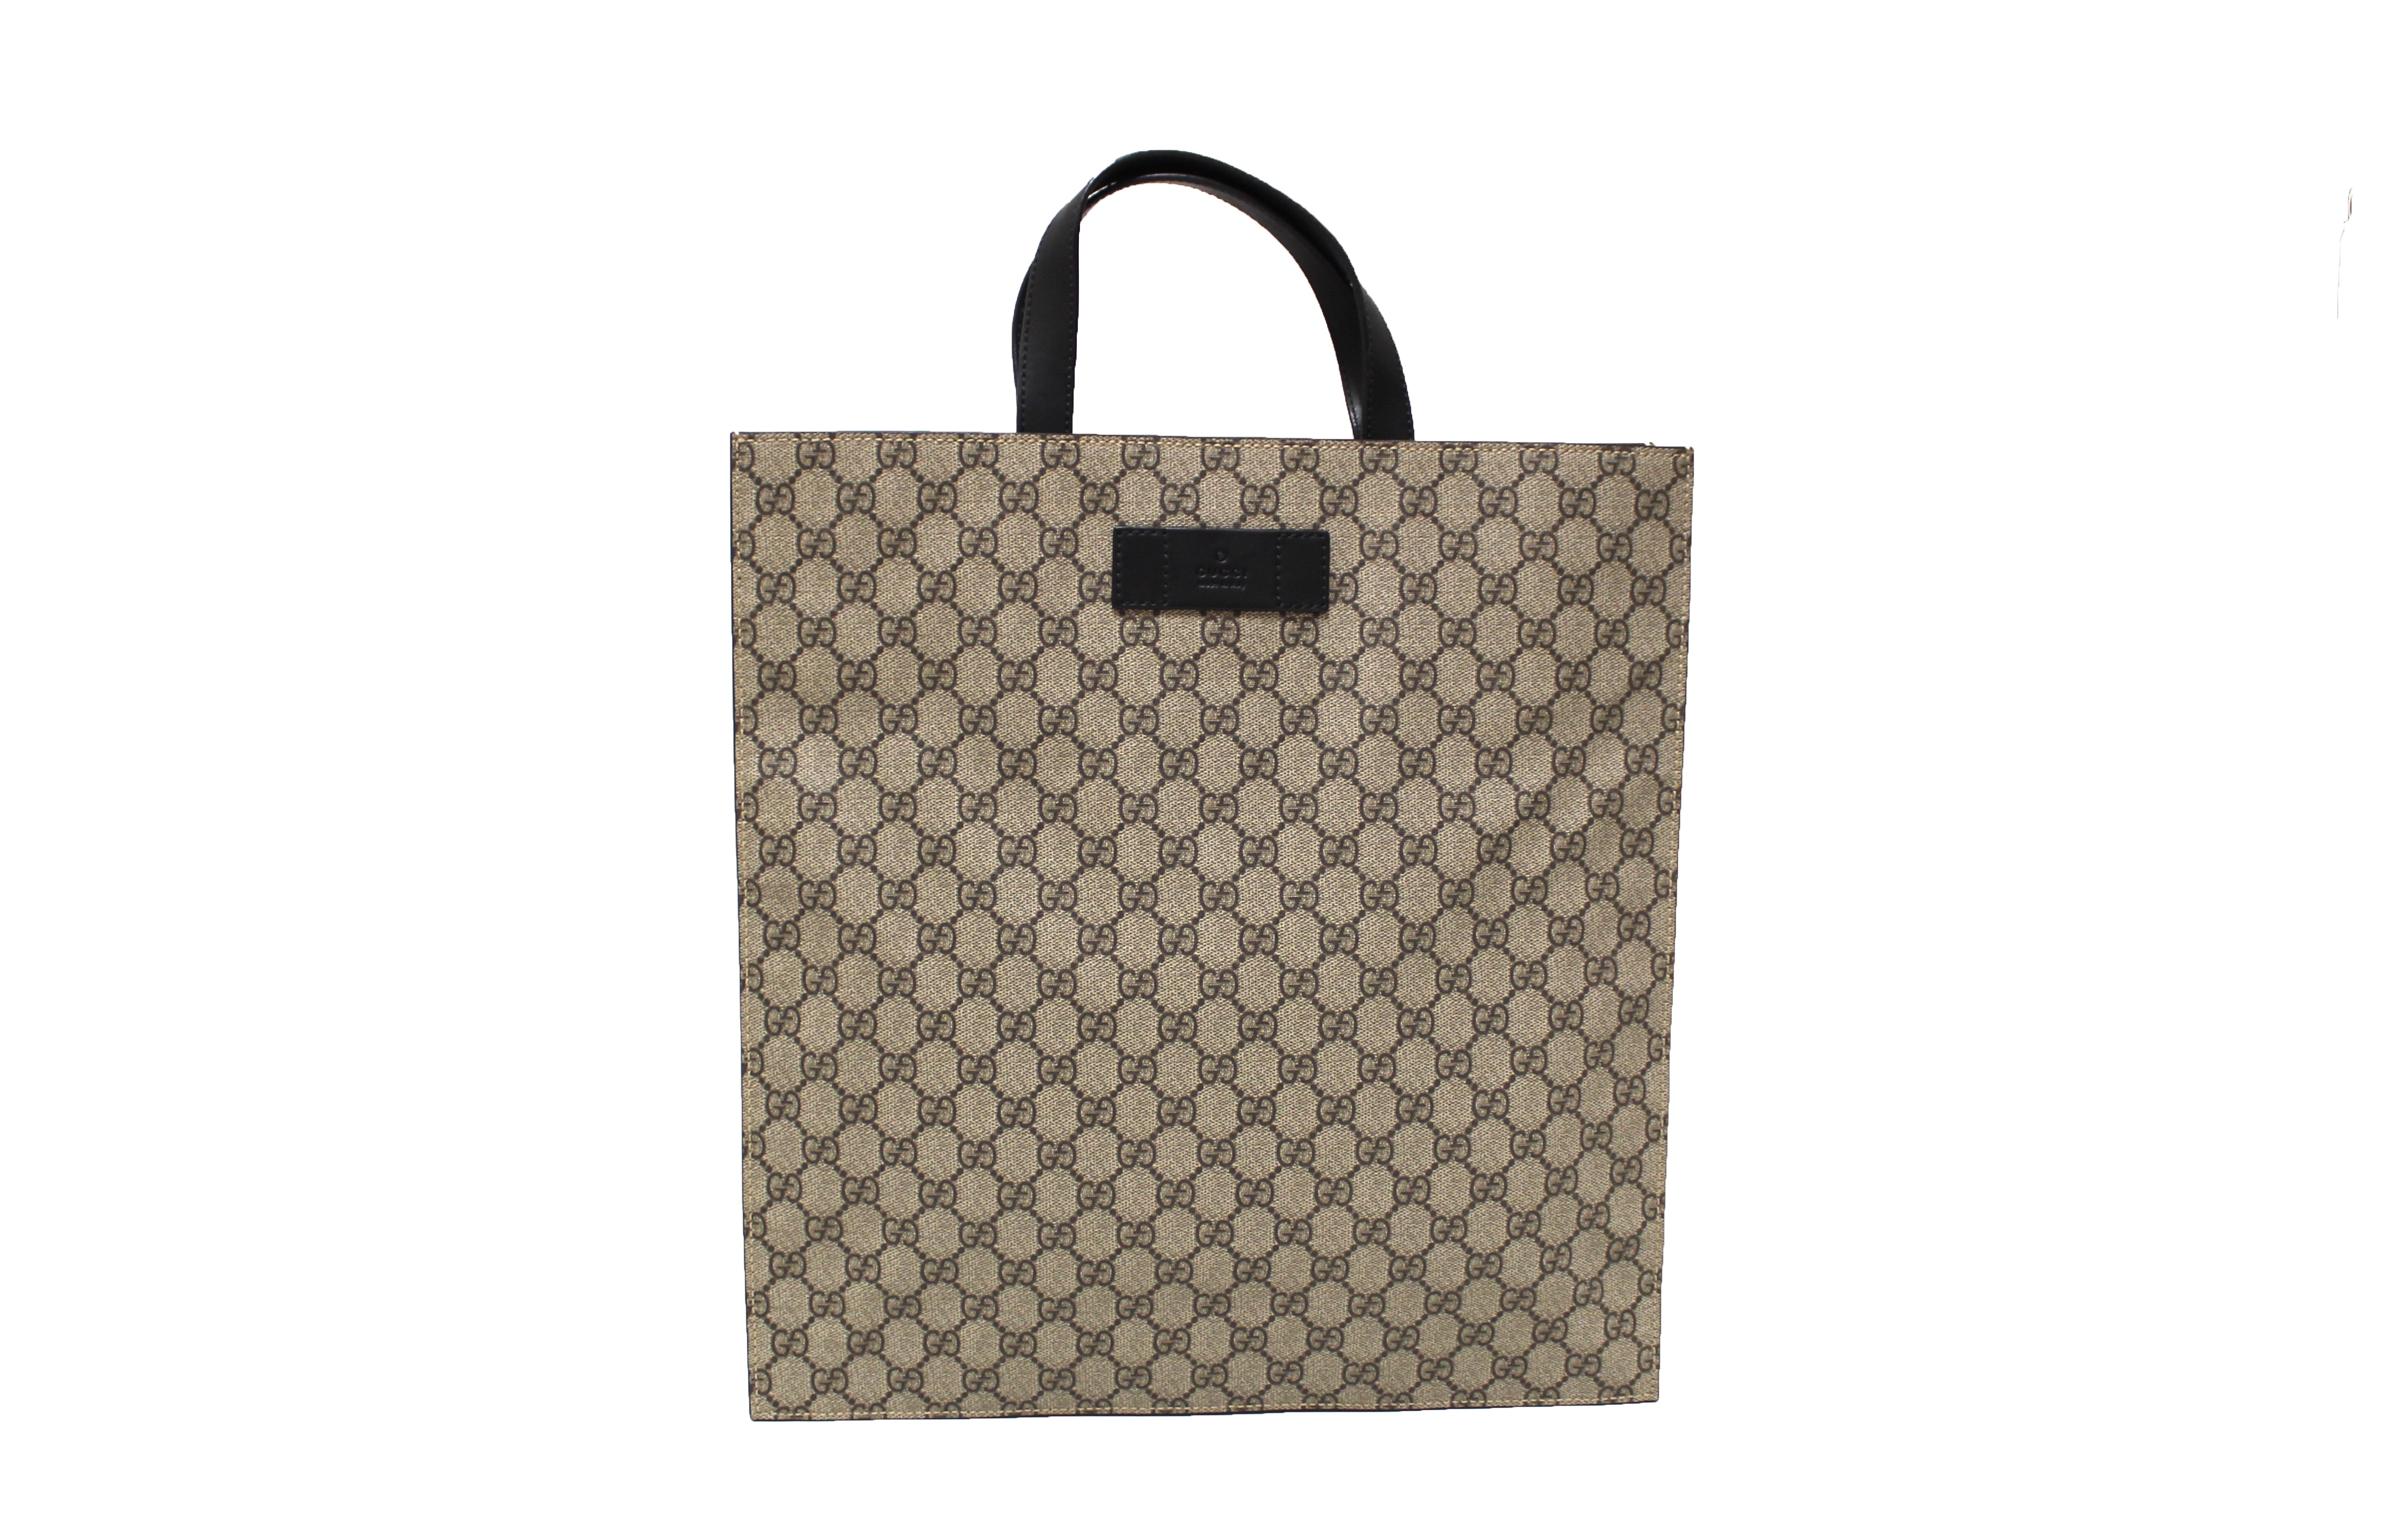 Authentic Gucci Brown GG Supreme Canvas with Black Leather Tote Bag 456217